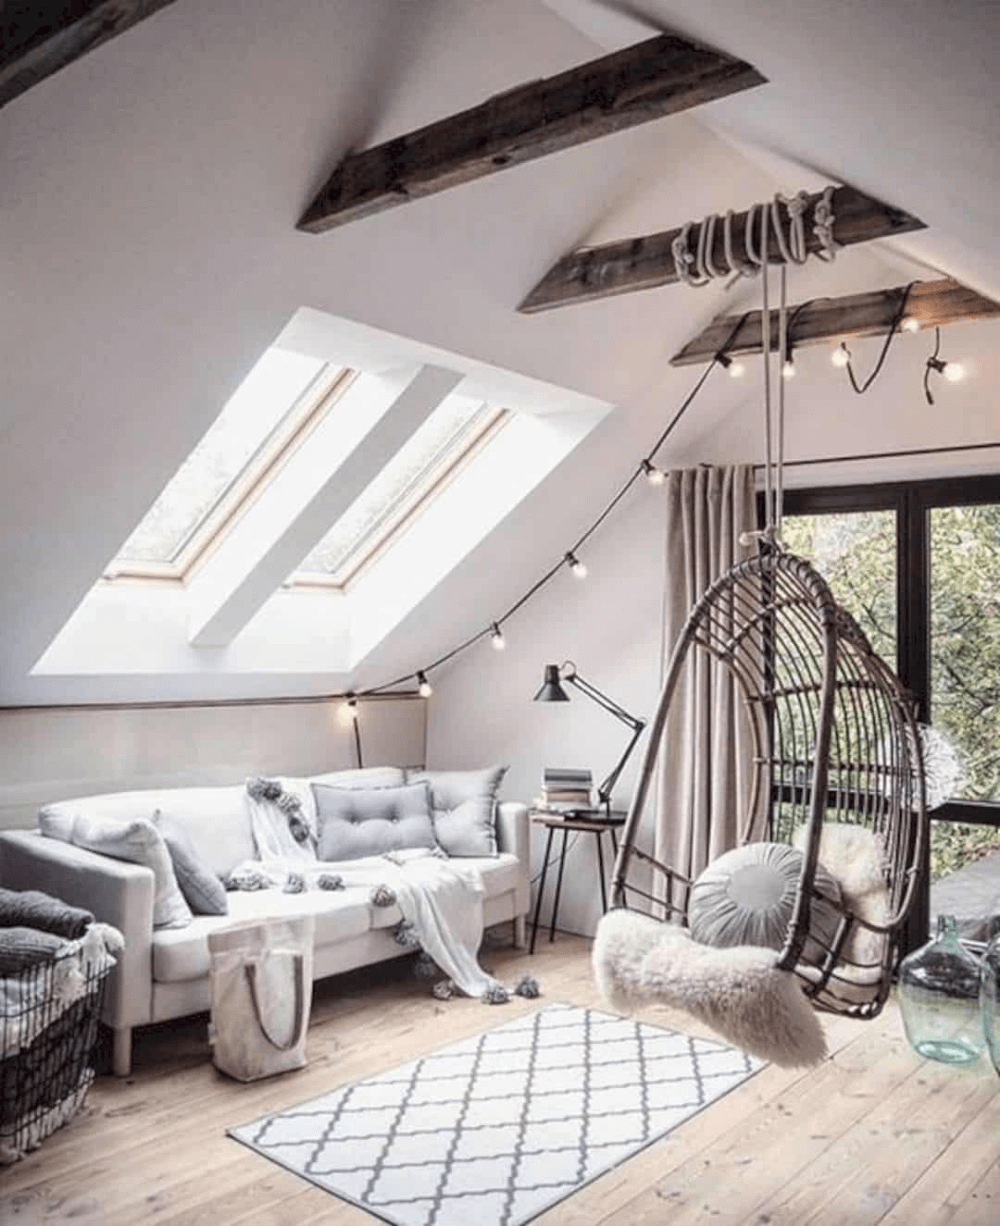 25 Ideas to Decorate An Attic Living Room (1)